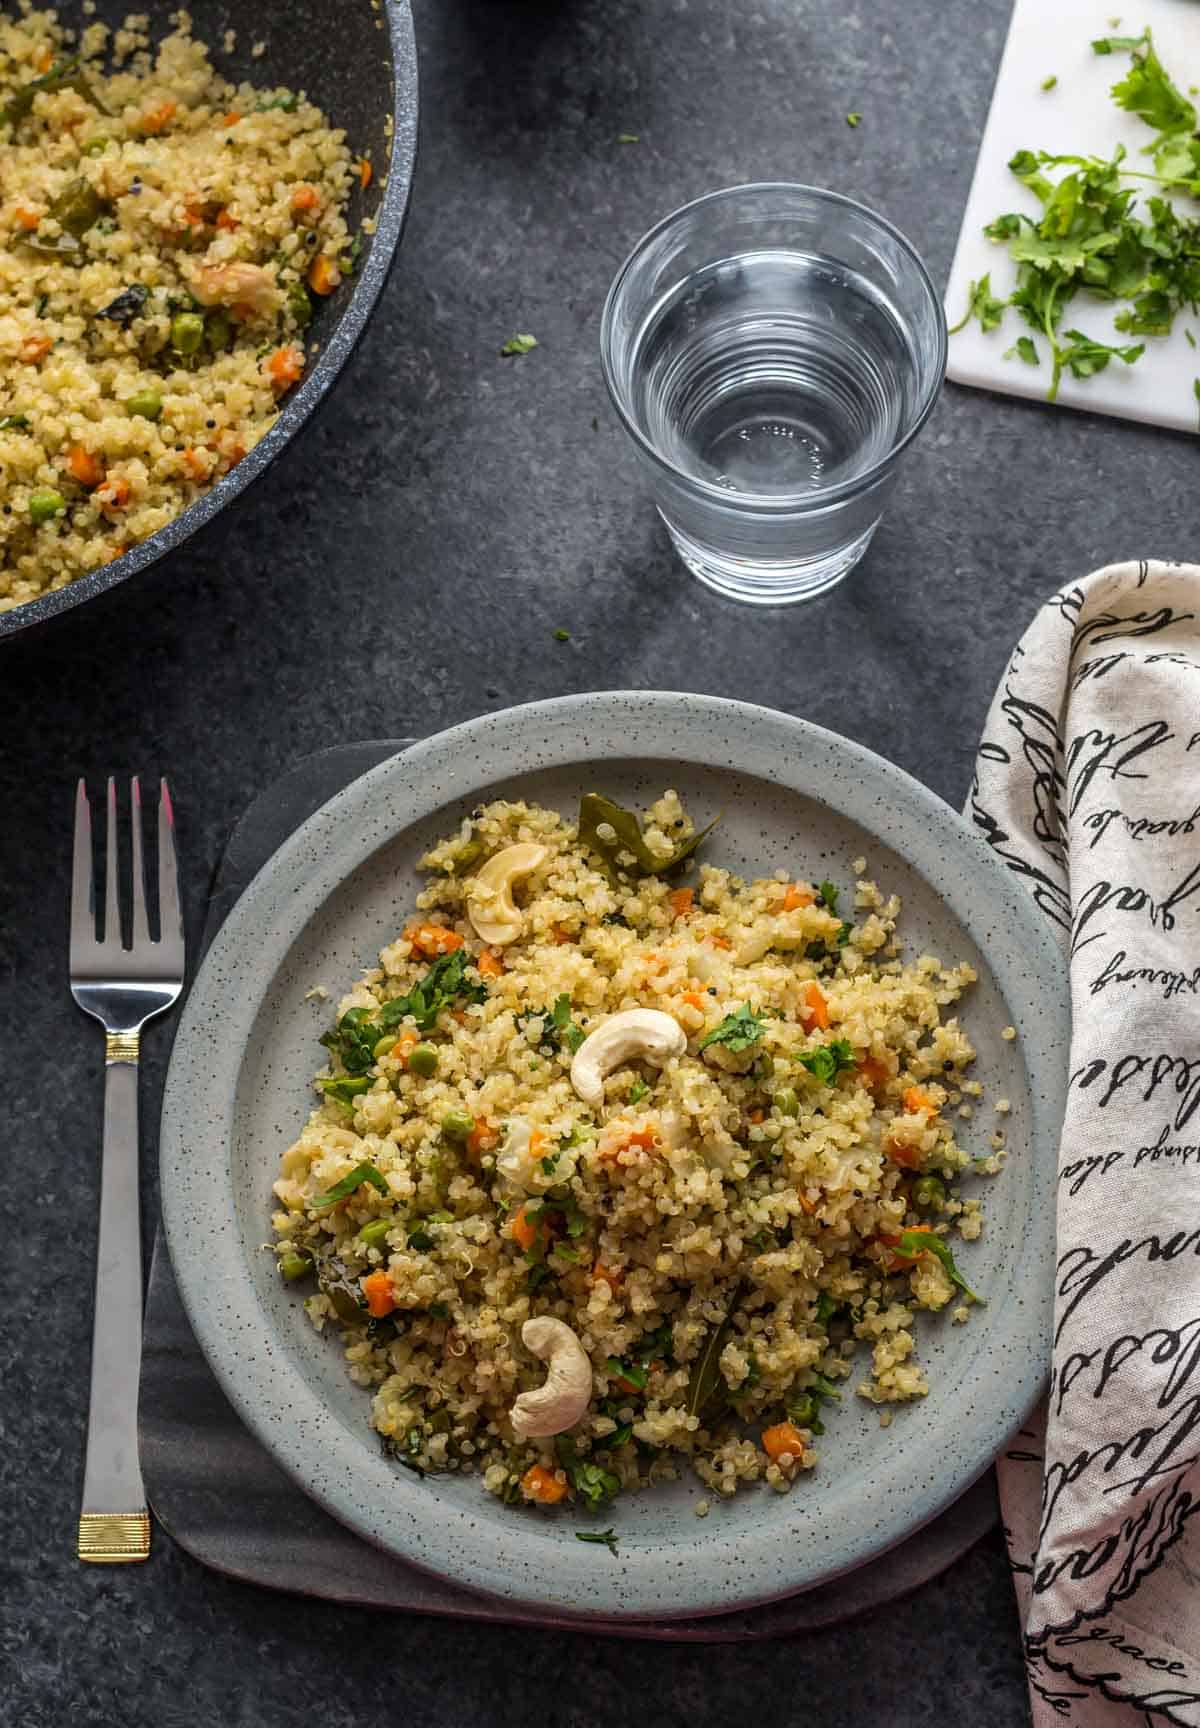 Vegetable Quinoa Pulao garnished with cashews on a grey plate with fork on the side.